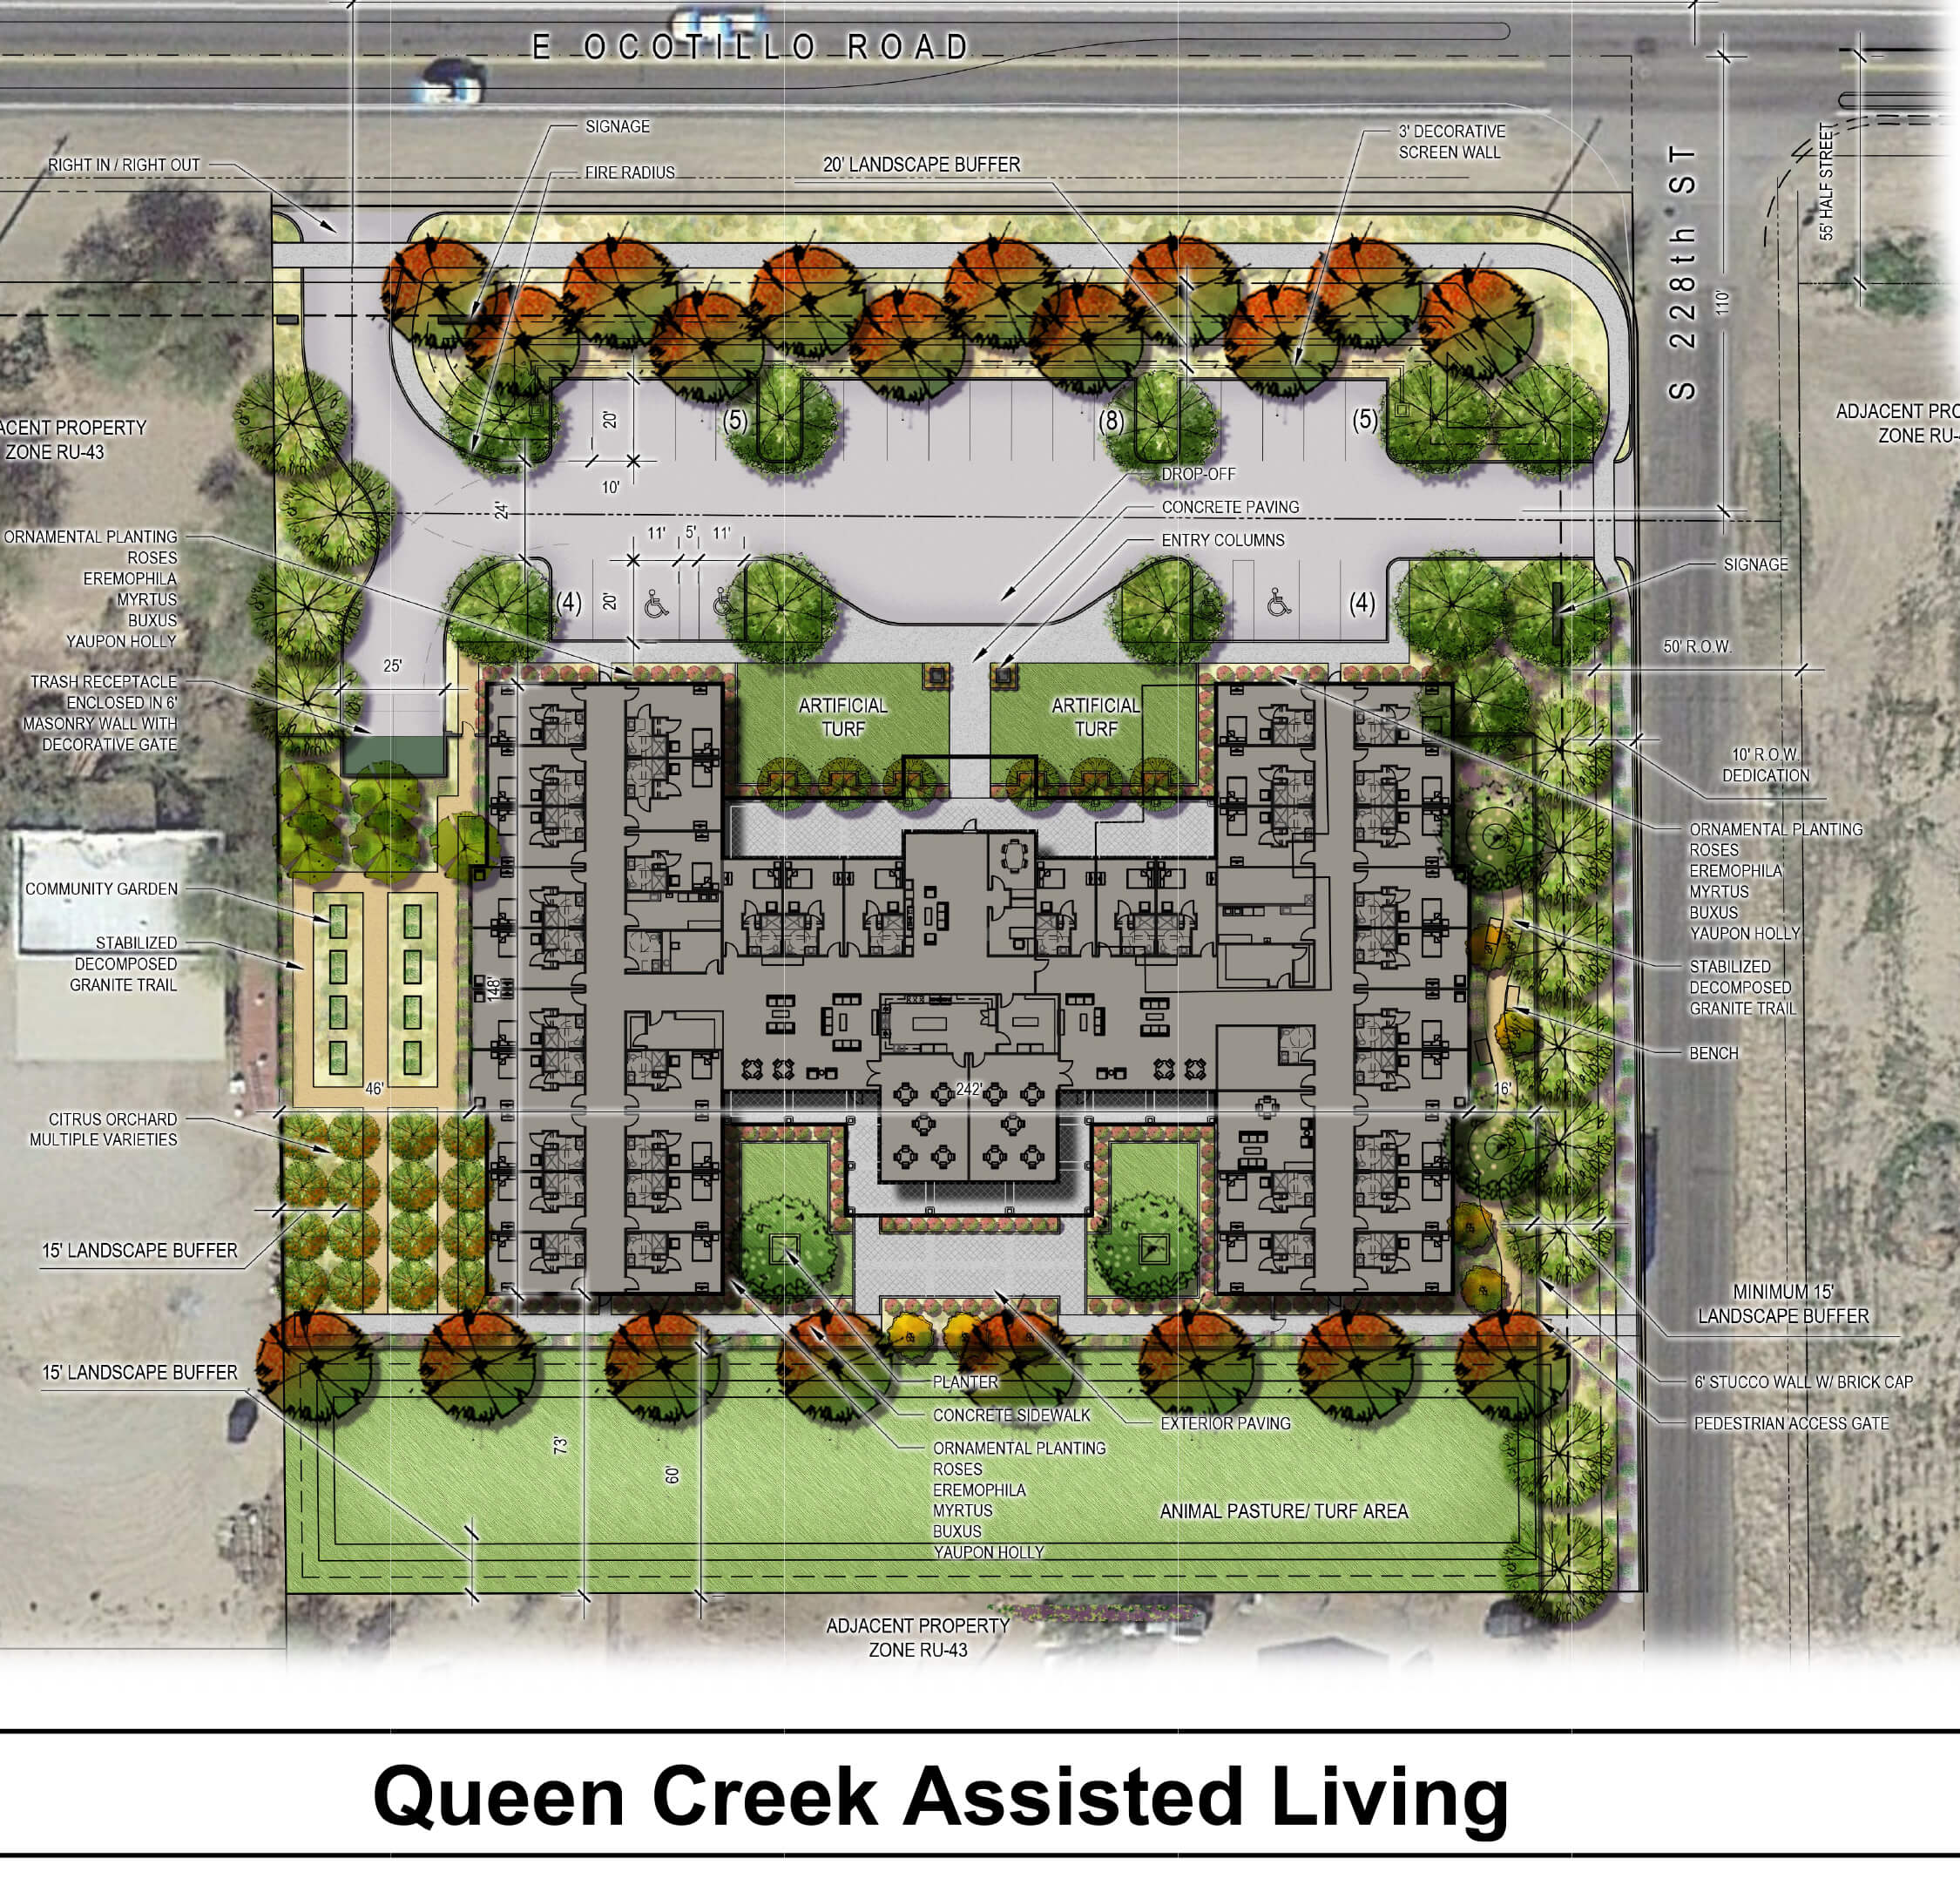 Queen Creek Assisted Living Facility